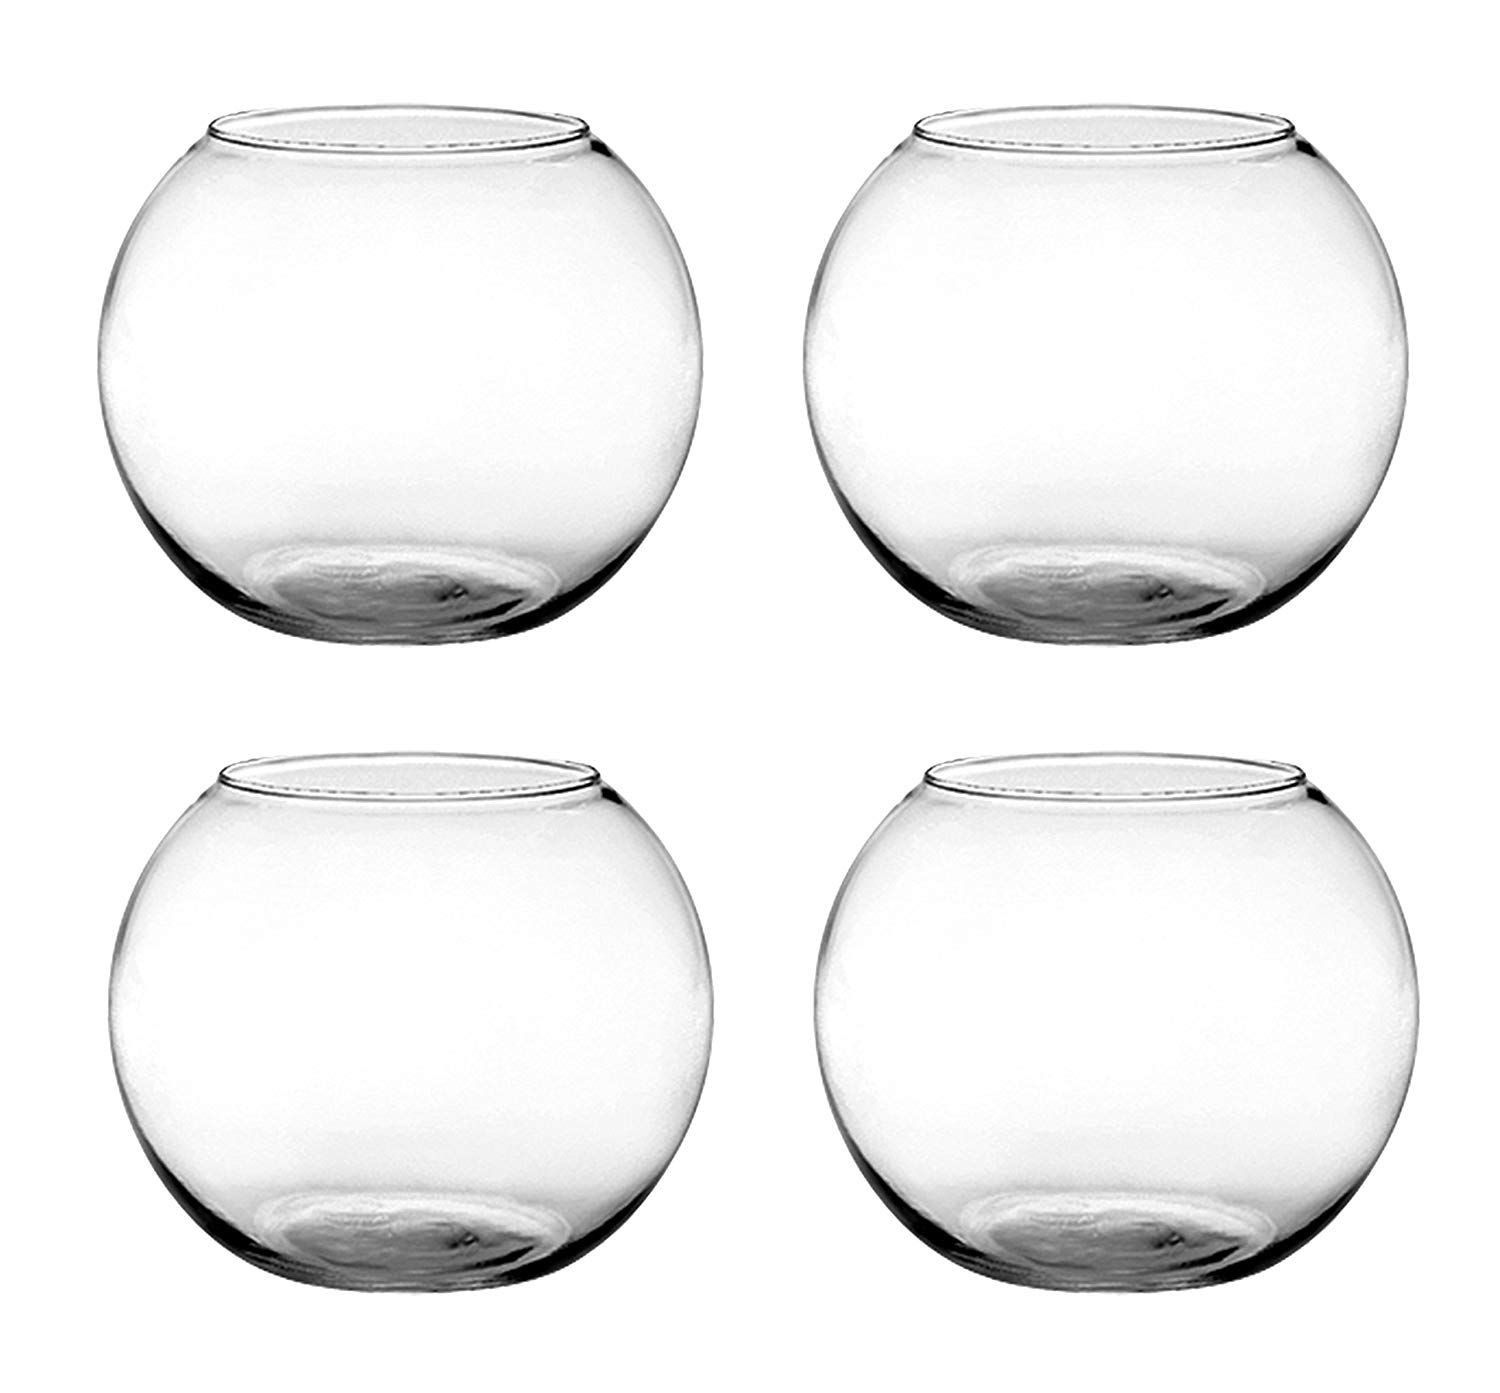 28 attractive White Bowl Vase 2023 free download white bowl vase of 32 wide mouth vase the weekly world for amazon syndicate sales 6 rose bowl clear planters garden